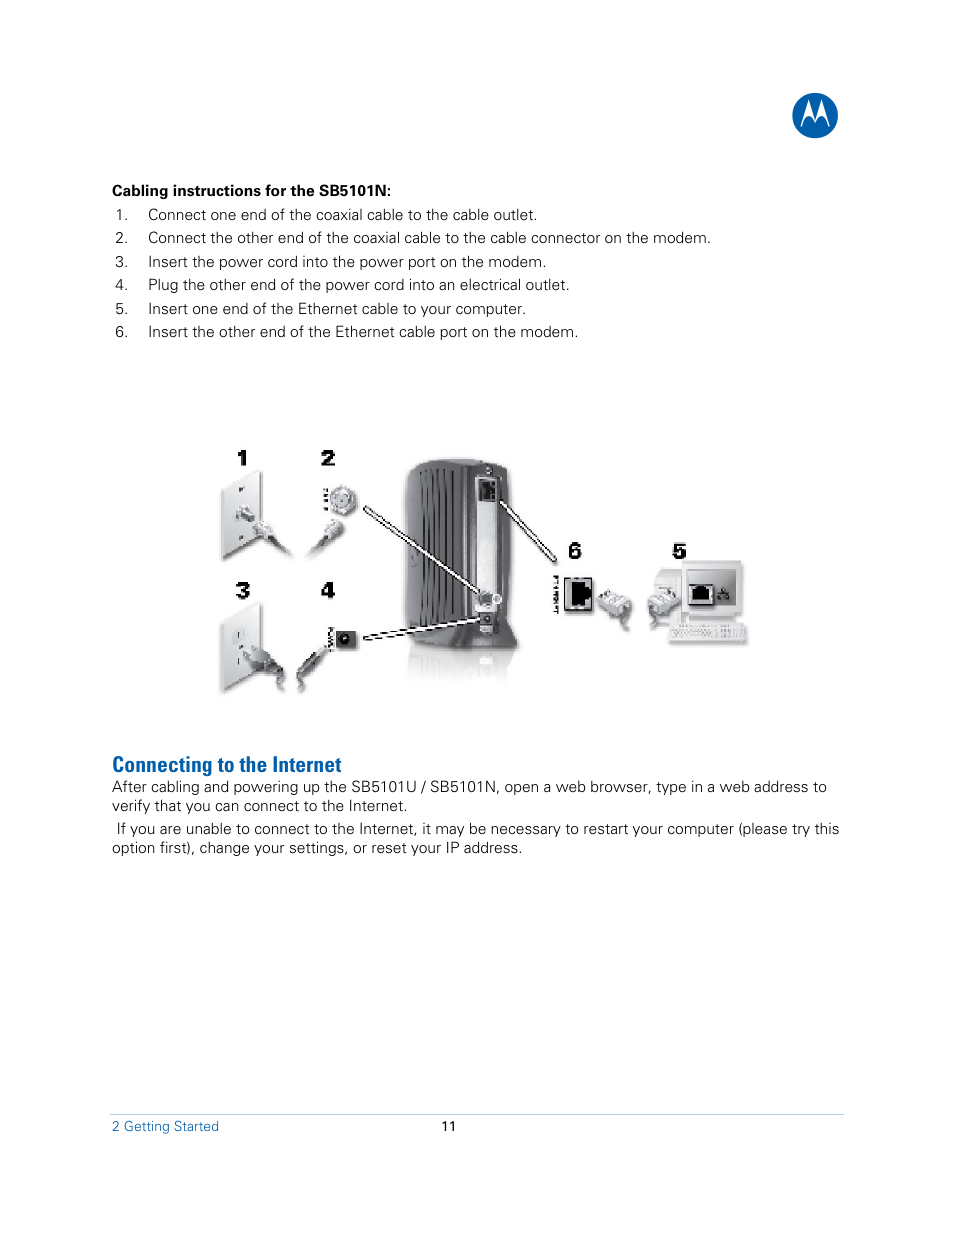 Connecting to the internet | Motorola SB5101N DOCSIS 2.0 Cable  Modem User Manual | Page 11 / 16